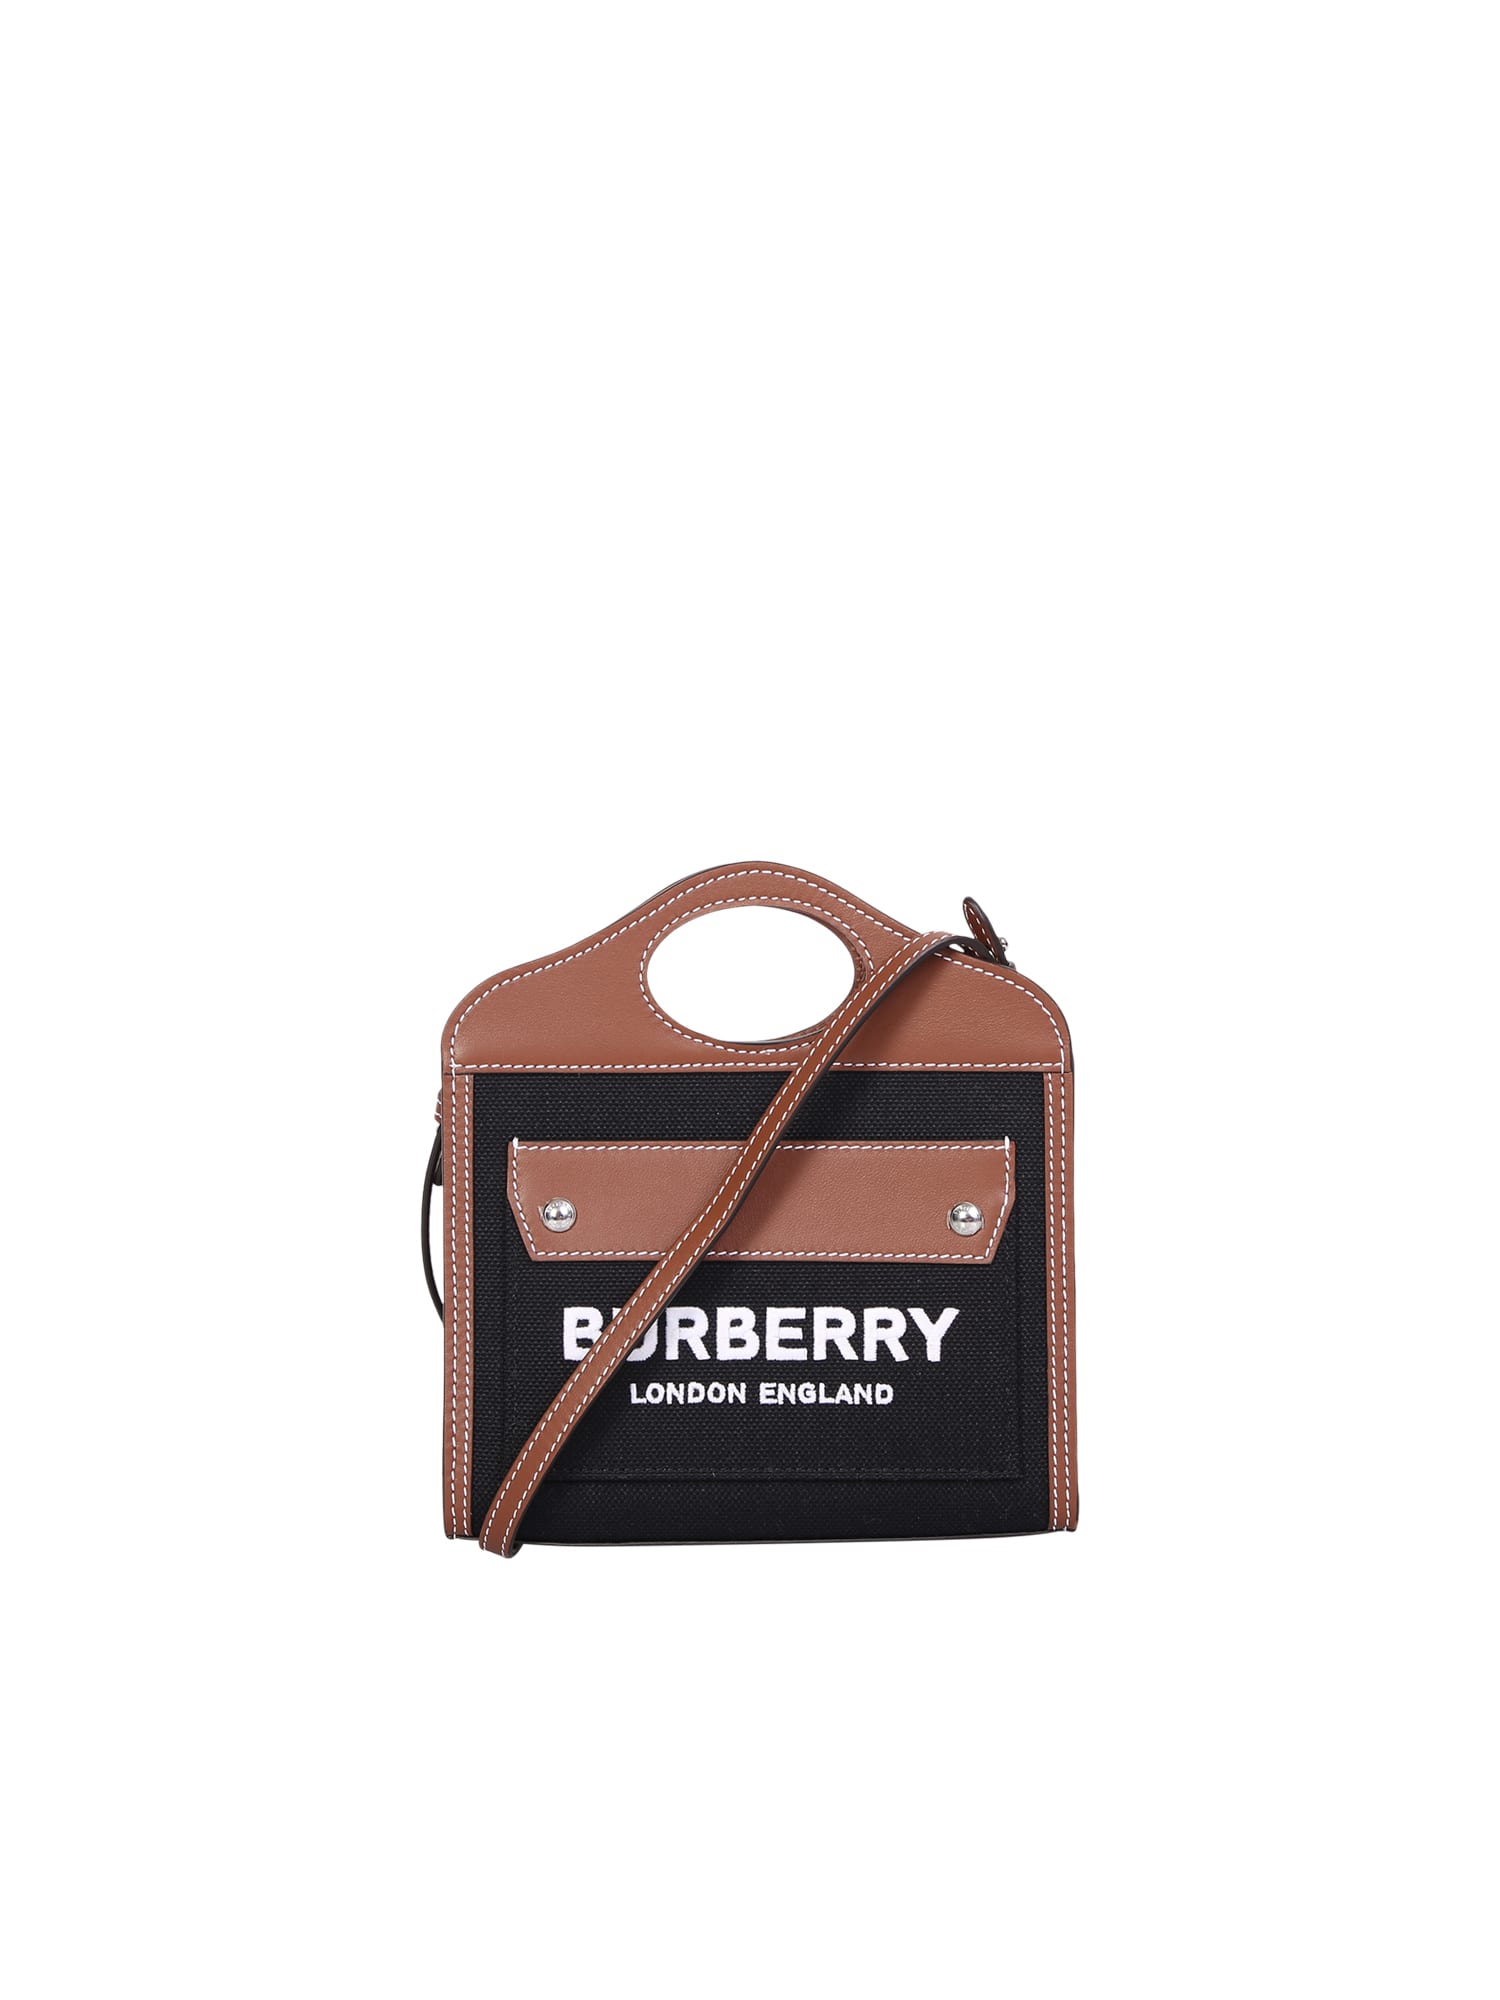 Burberry Mini Tote Bag. Iconic And Timeless, Made Contemporary And Innovative